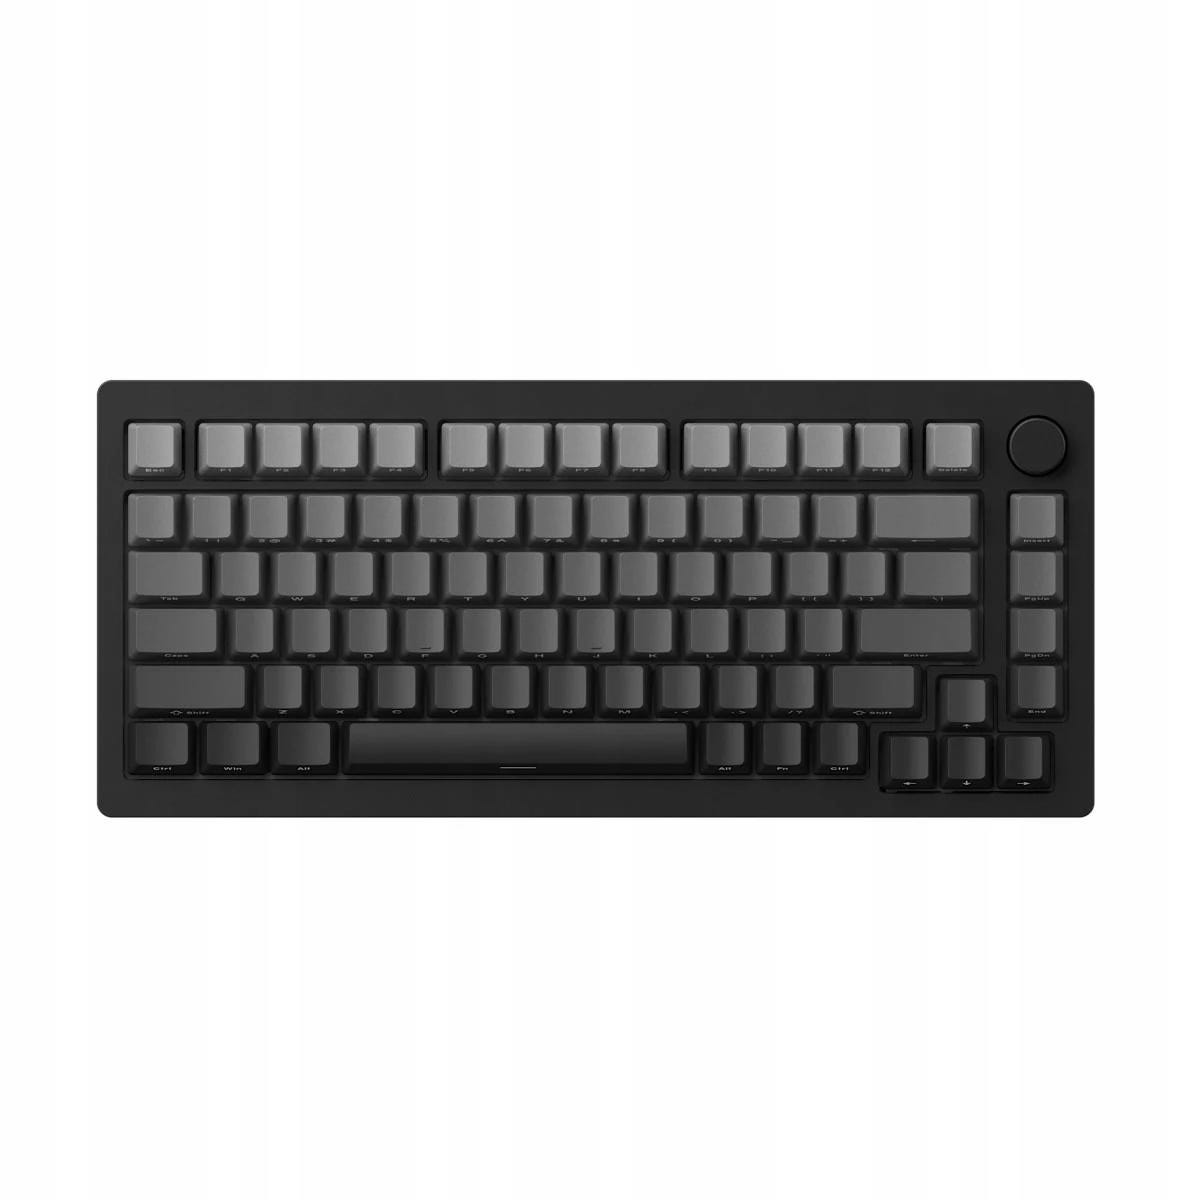 Aluminum Multi-mode Pre-assembled Hot Swappable RGB Keyboard | Image